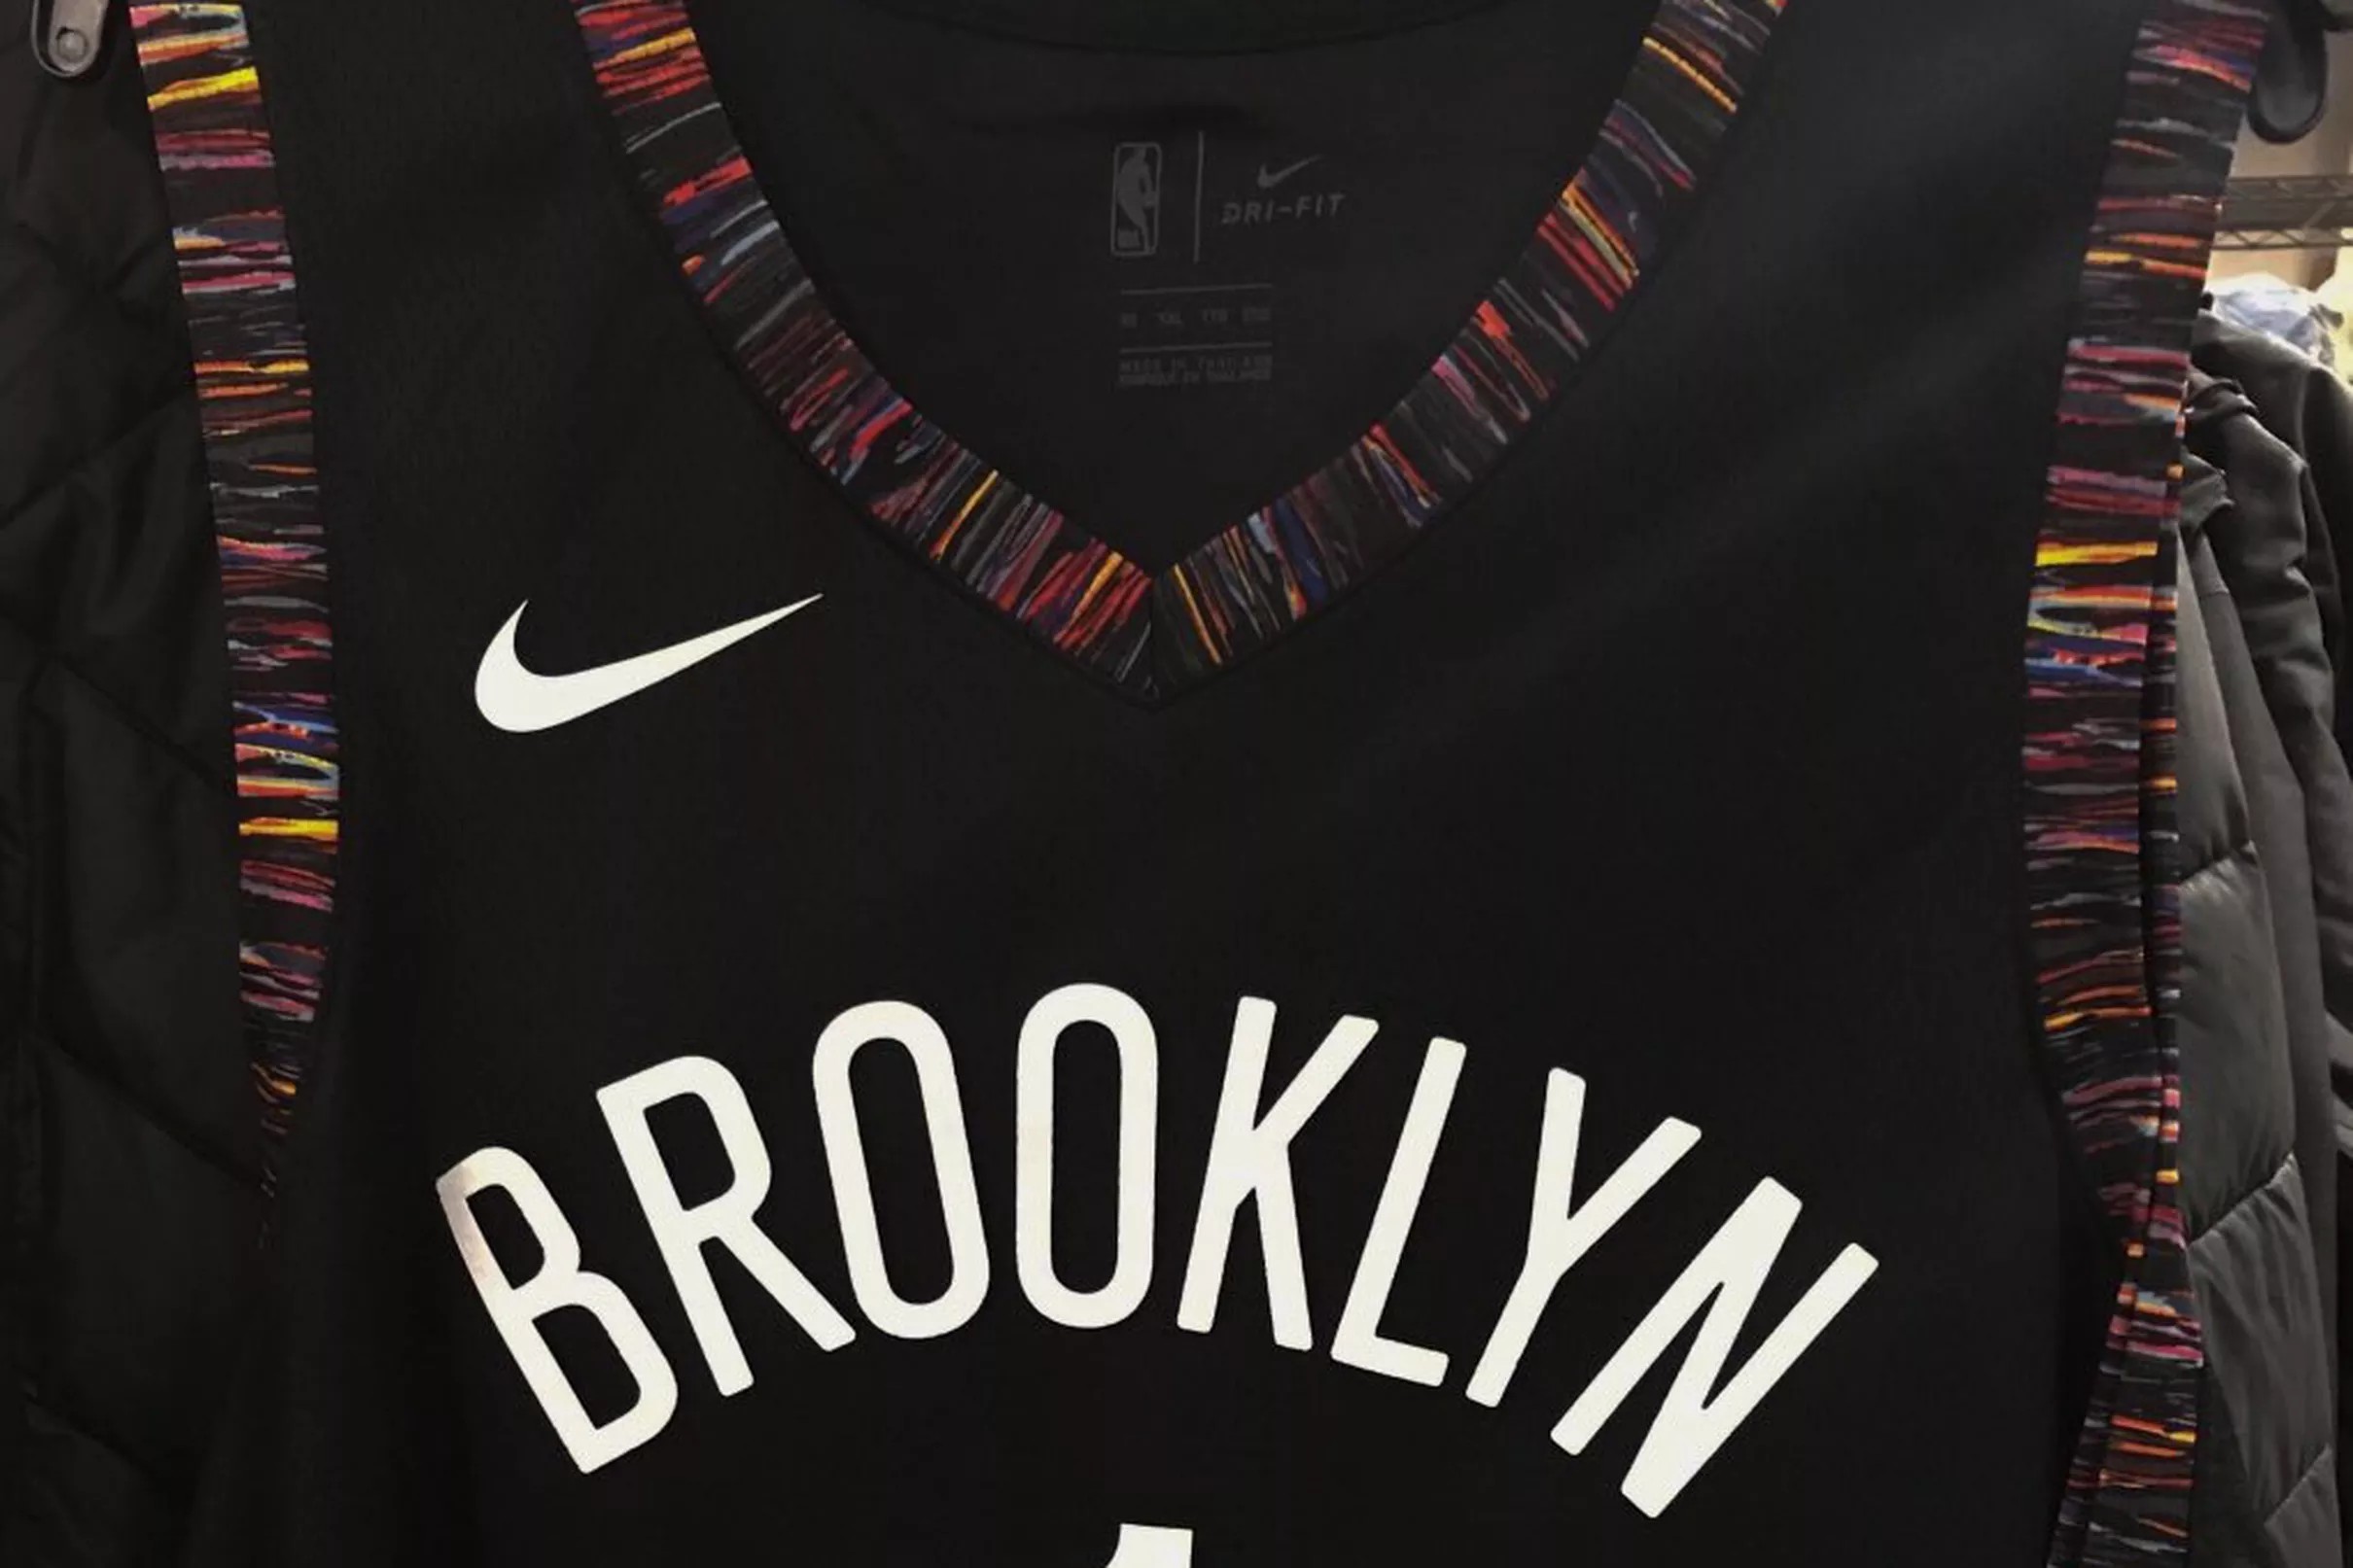 Will these be Brooklyn’s ‘City Edition’ jerseys?